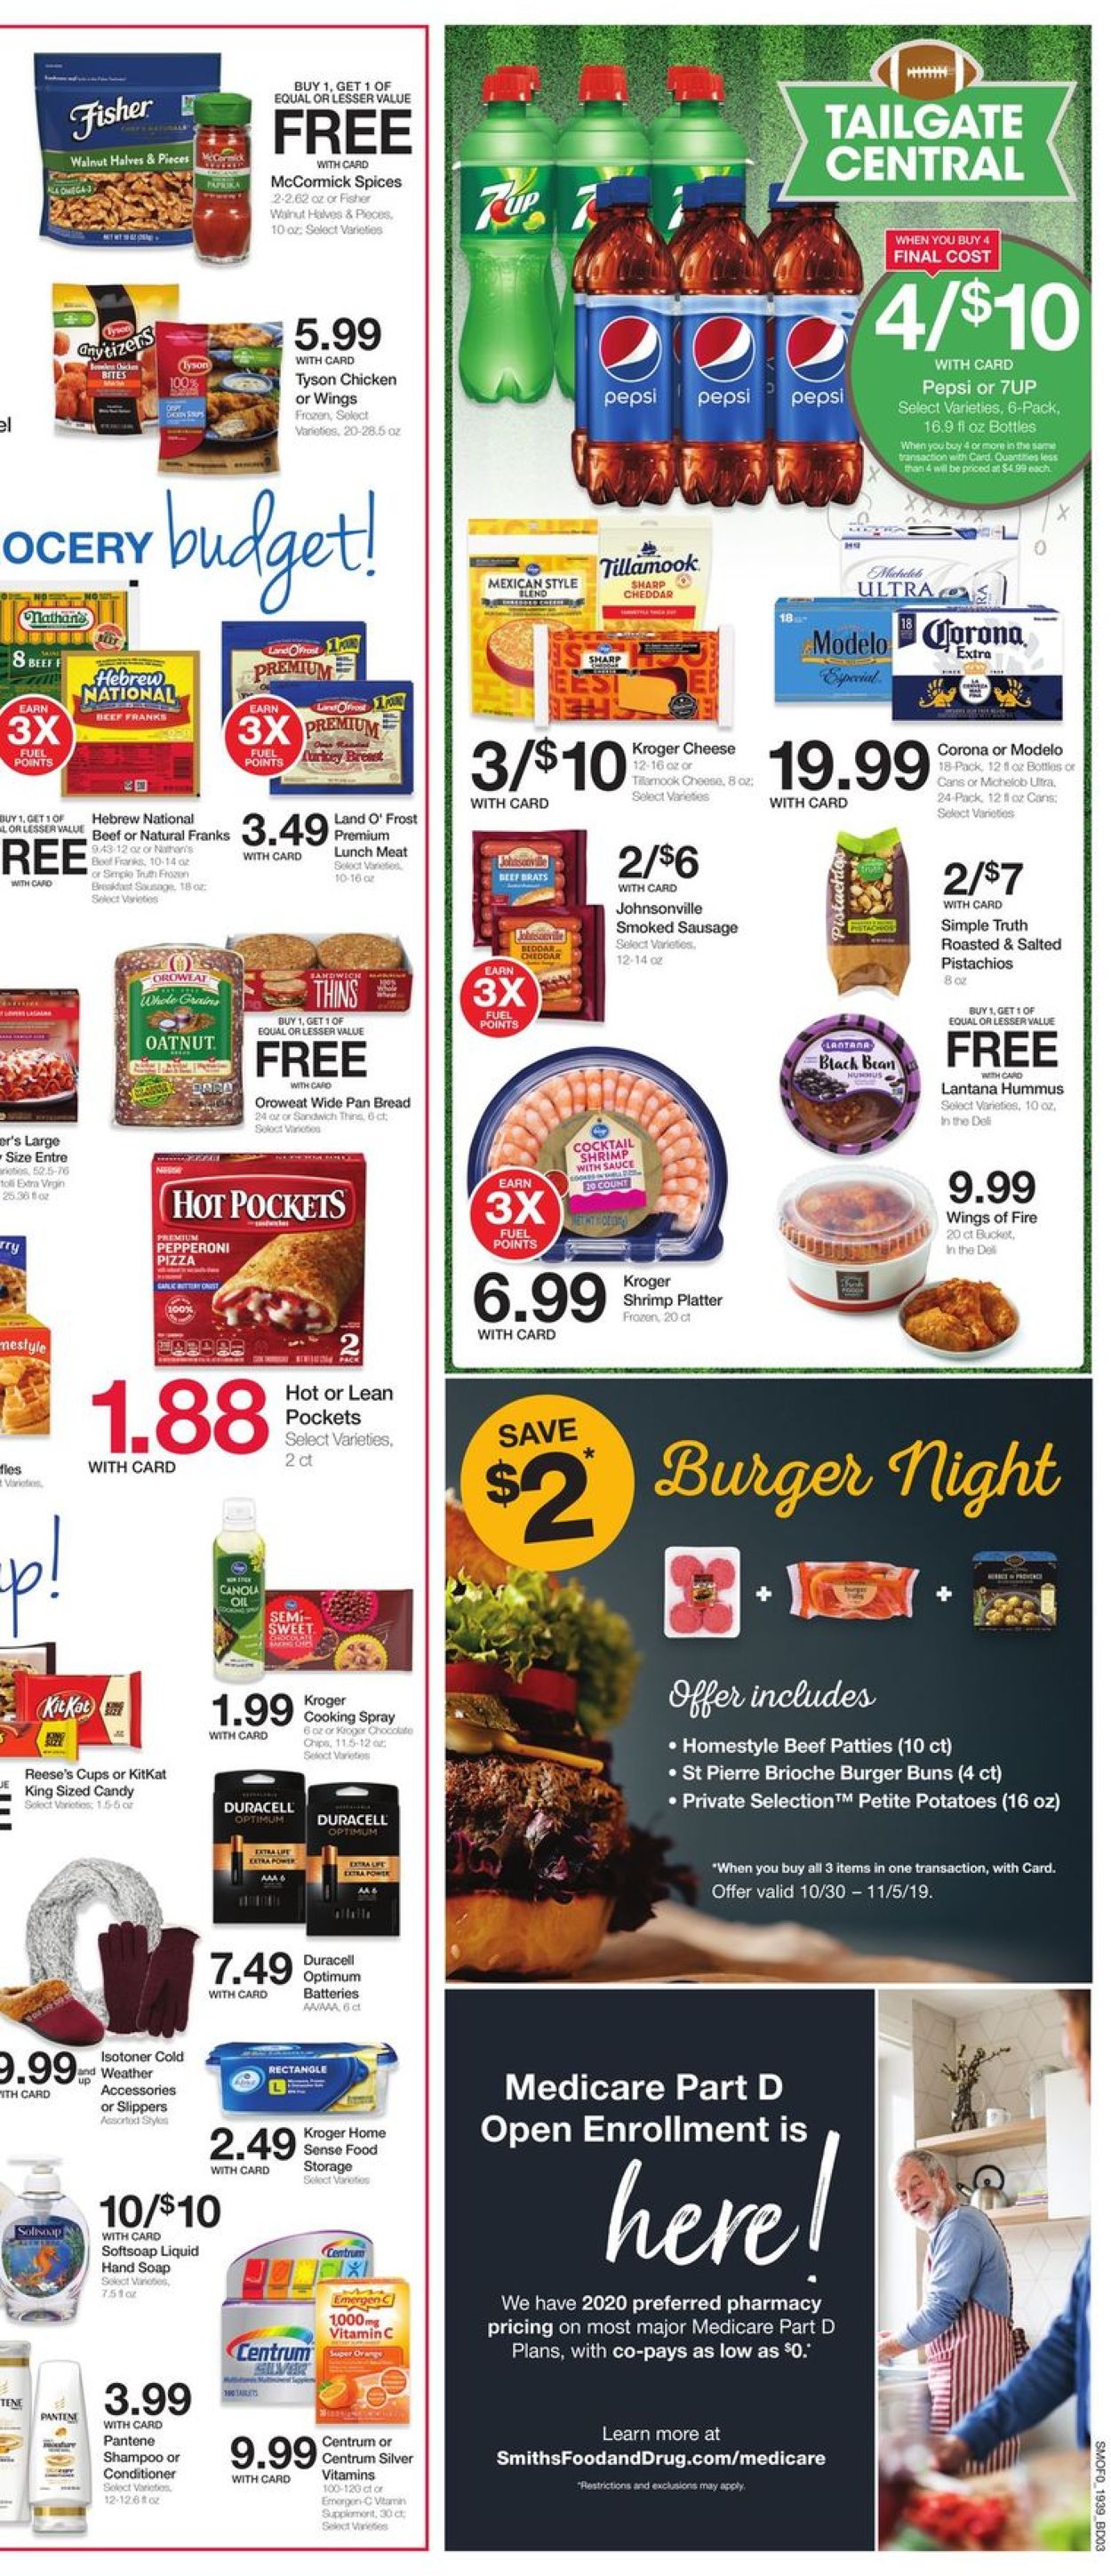 Catalogue Smith's from 10/30/2019